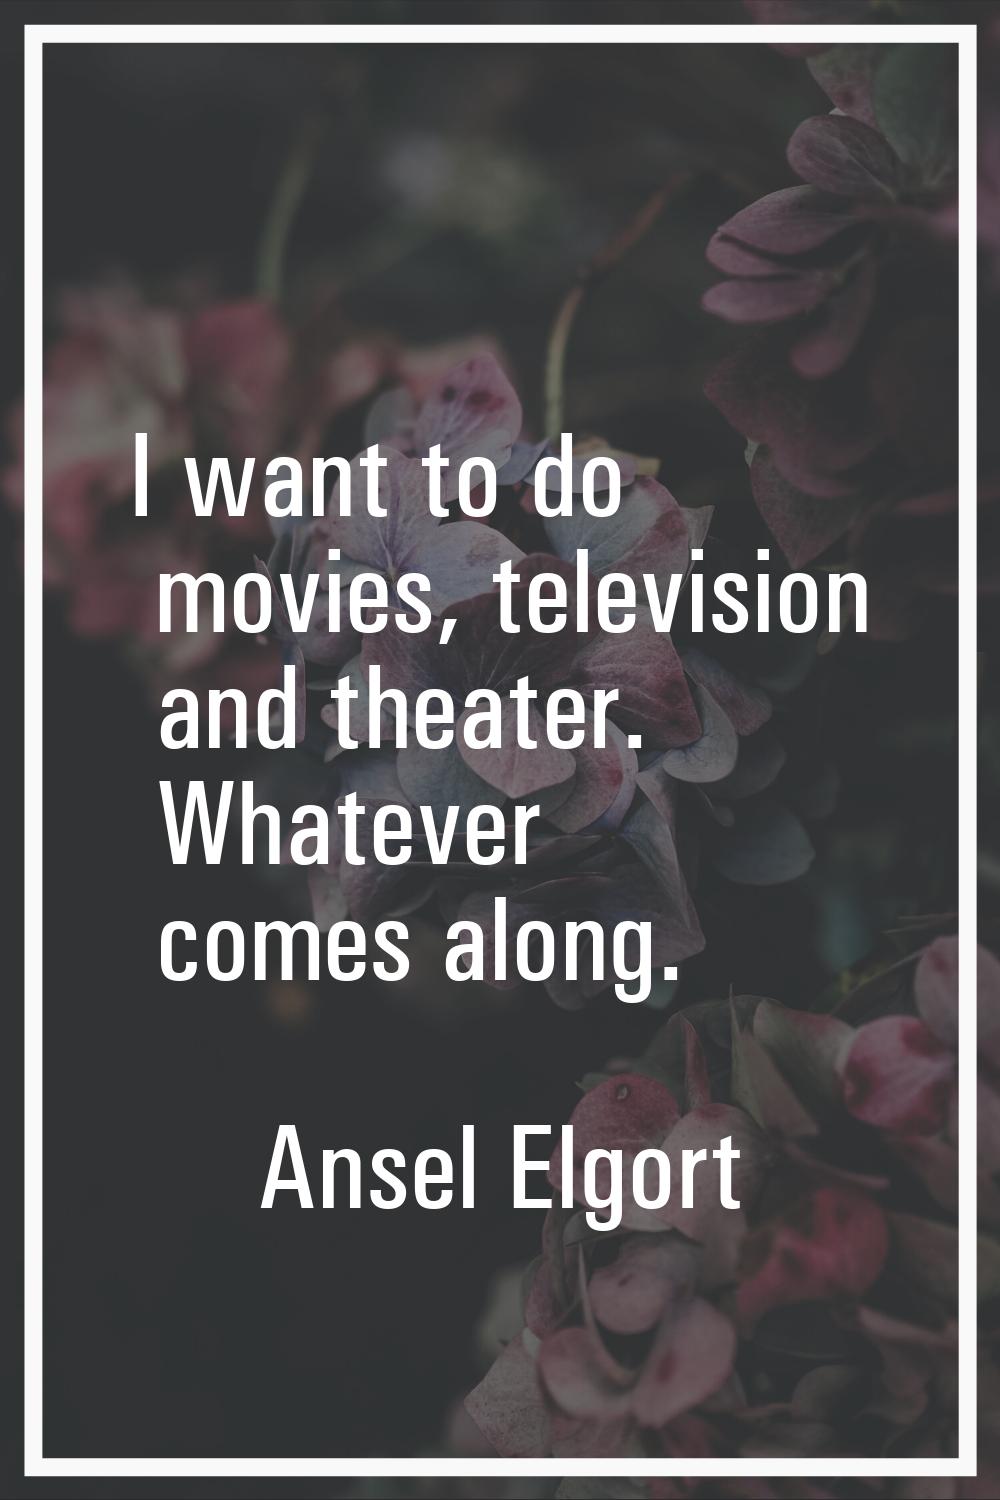 I want to do movies, television and theater. Whatever comes along.